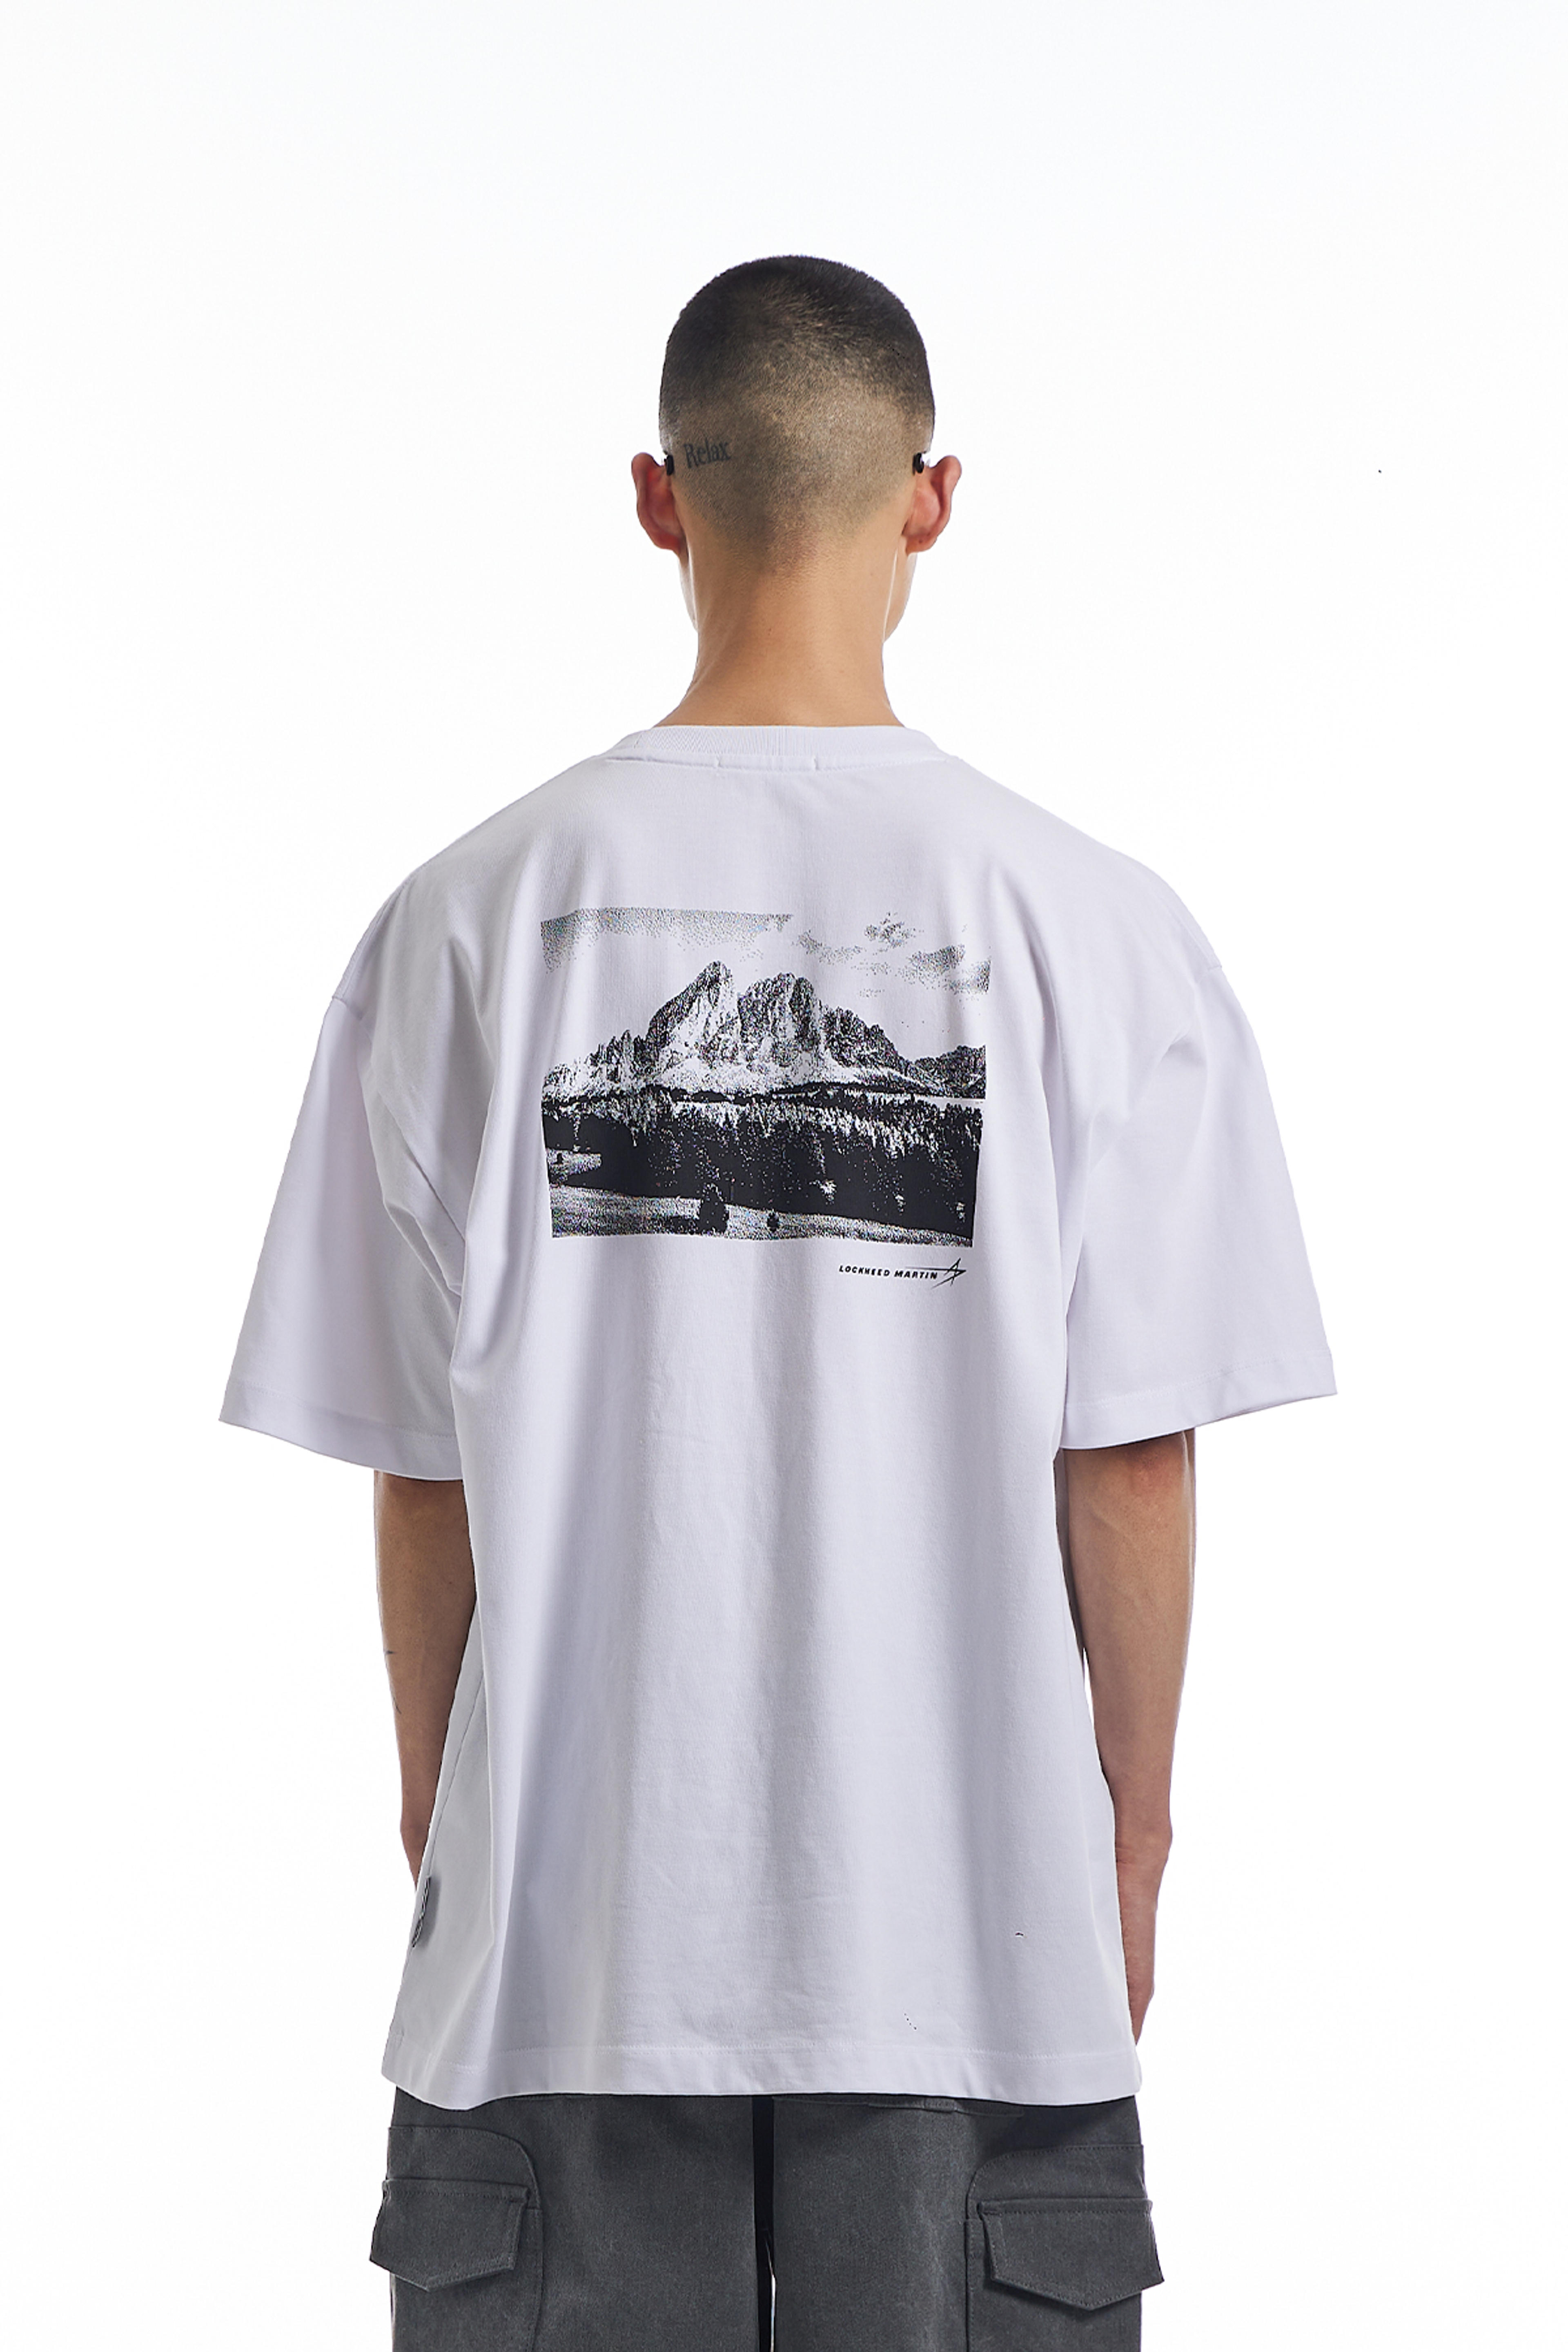 ROCKY MT. OVER T-SHIRT (WHITE)